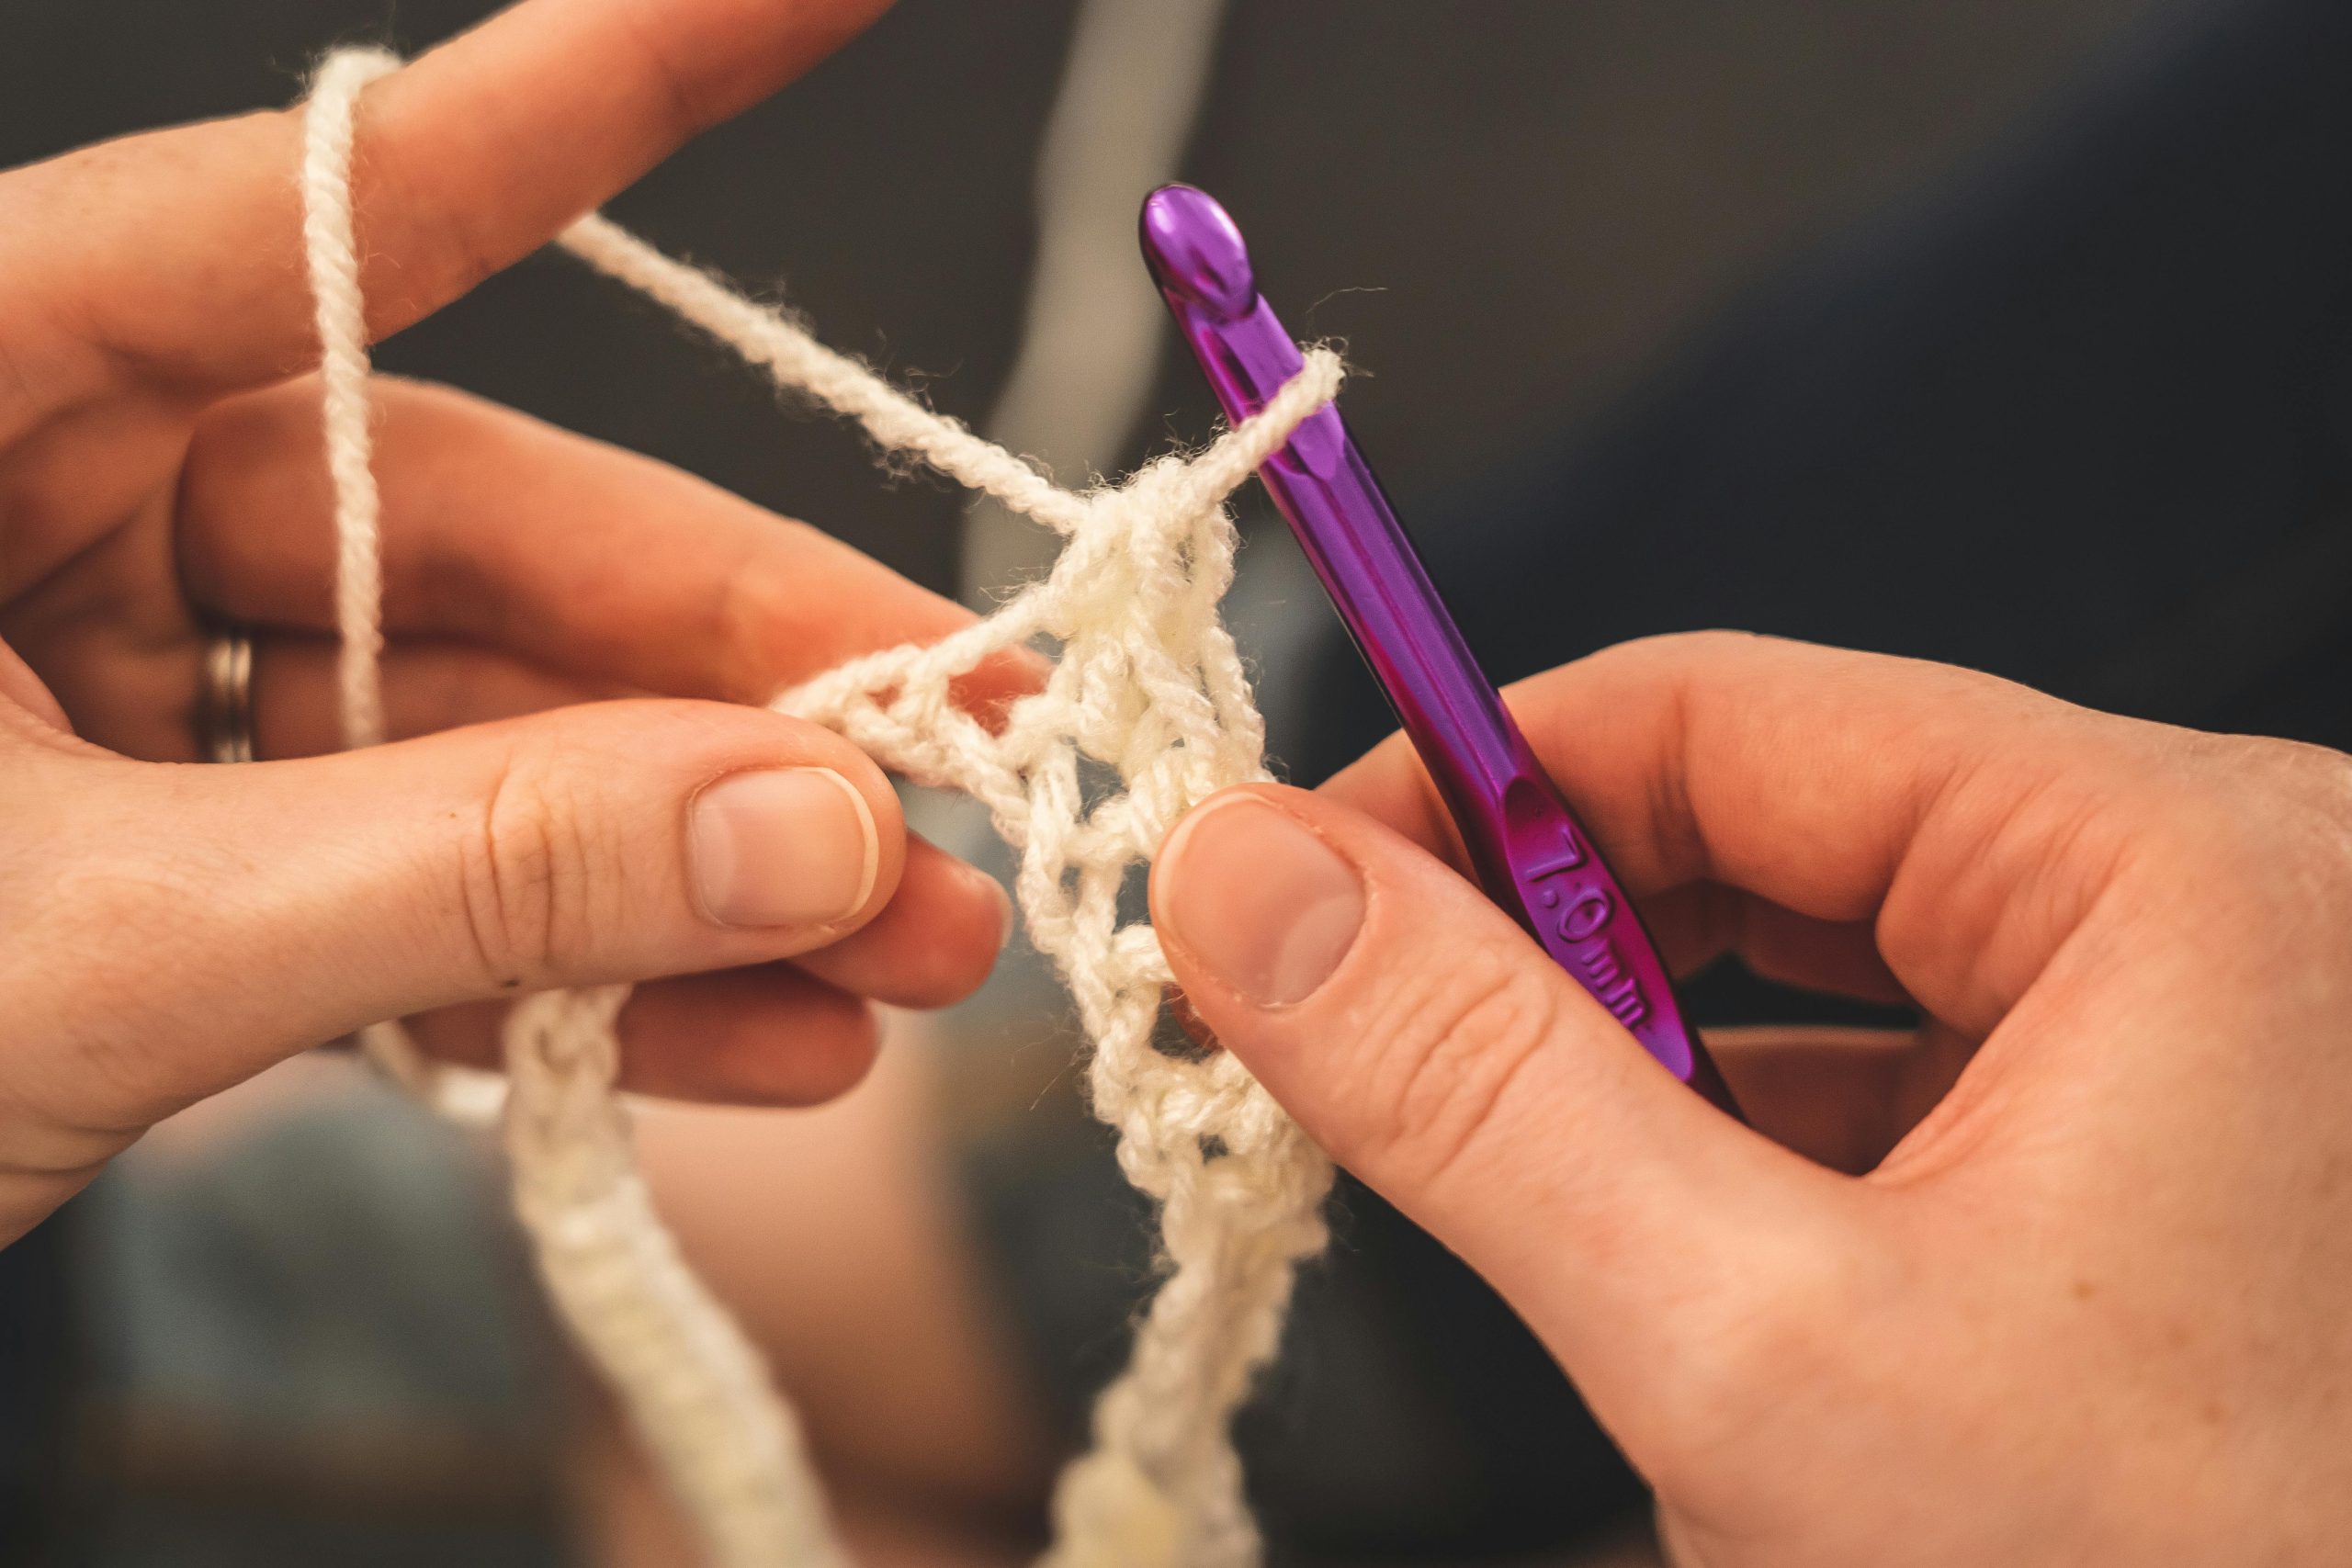 Can You Knit With Chopsticks?